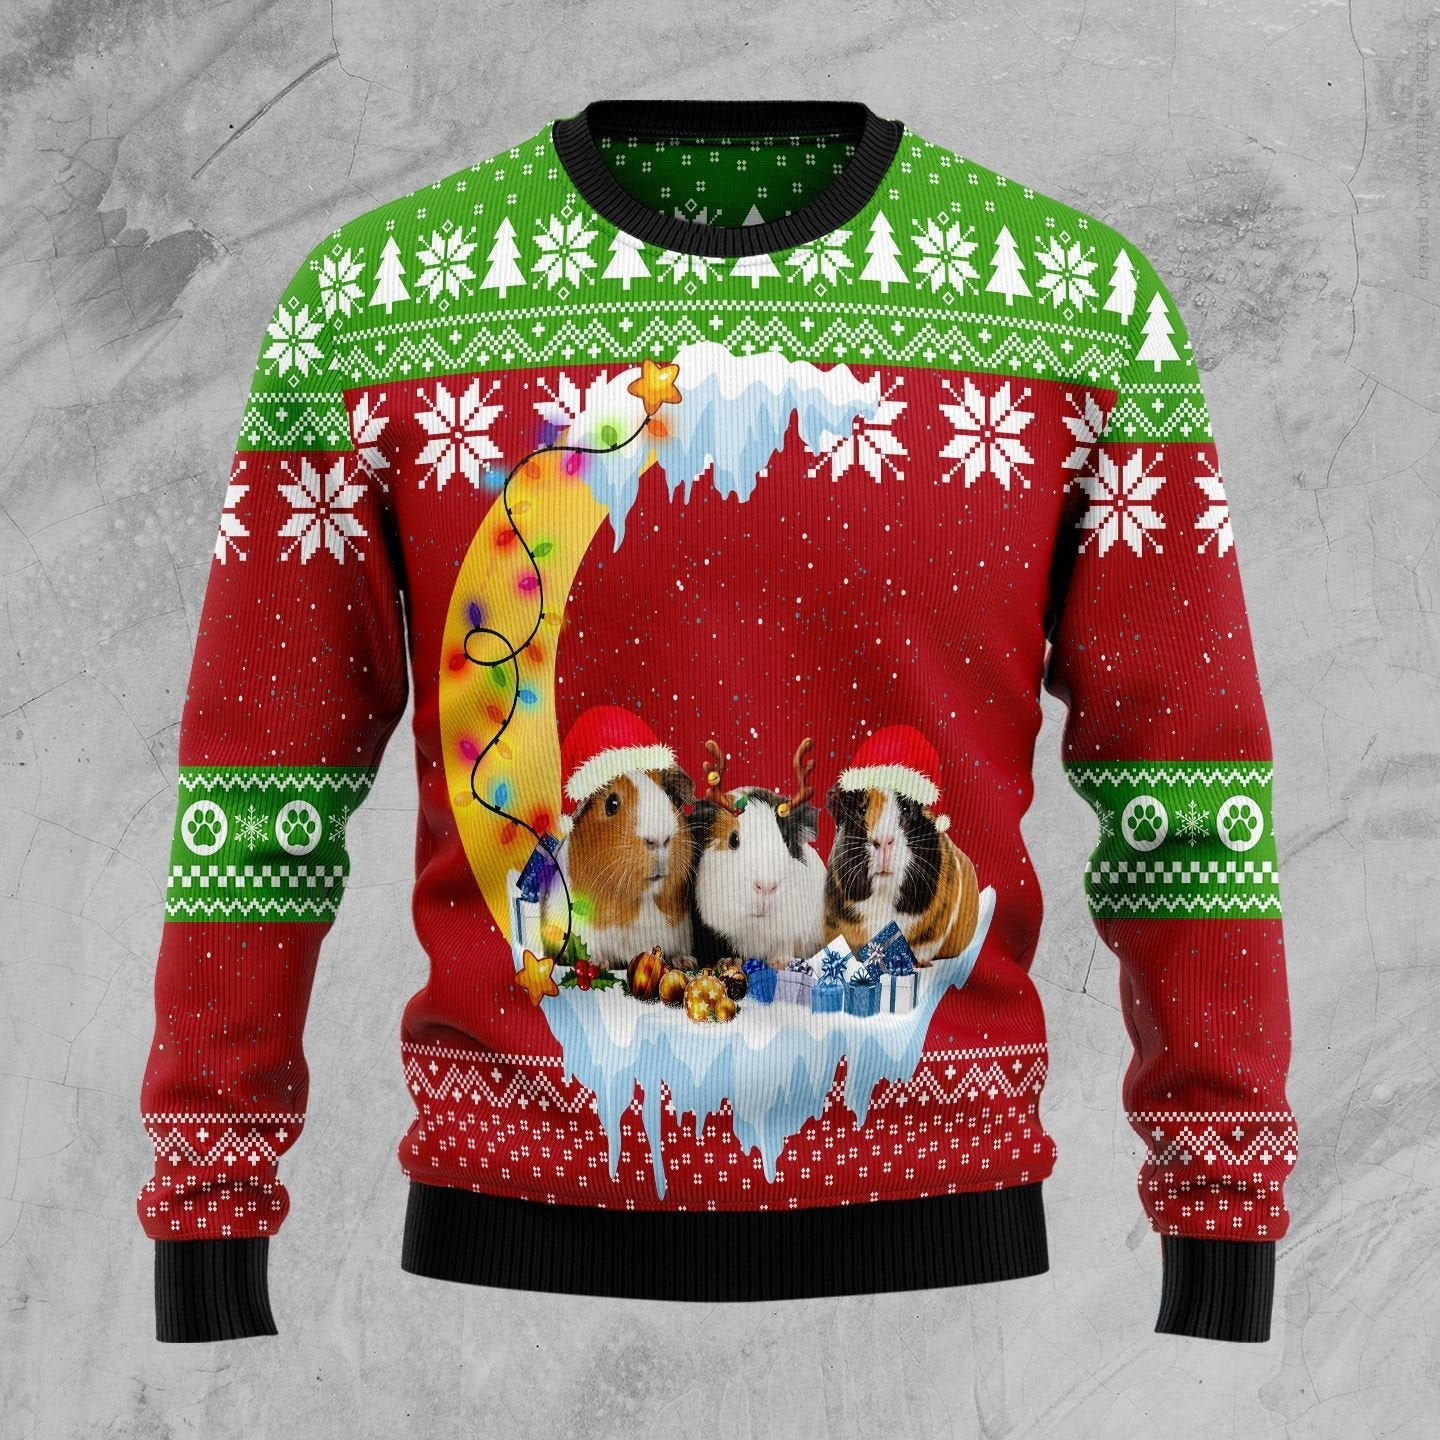 Guinea Pig Love Moon Xmas Ugly Christmas Sweater Ugly Sweater For Men Women